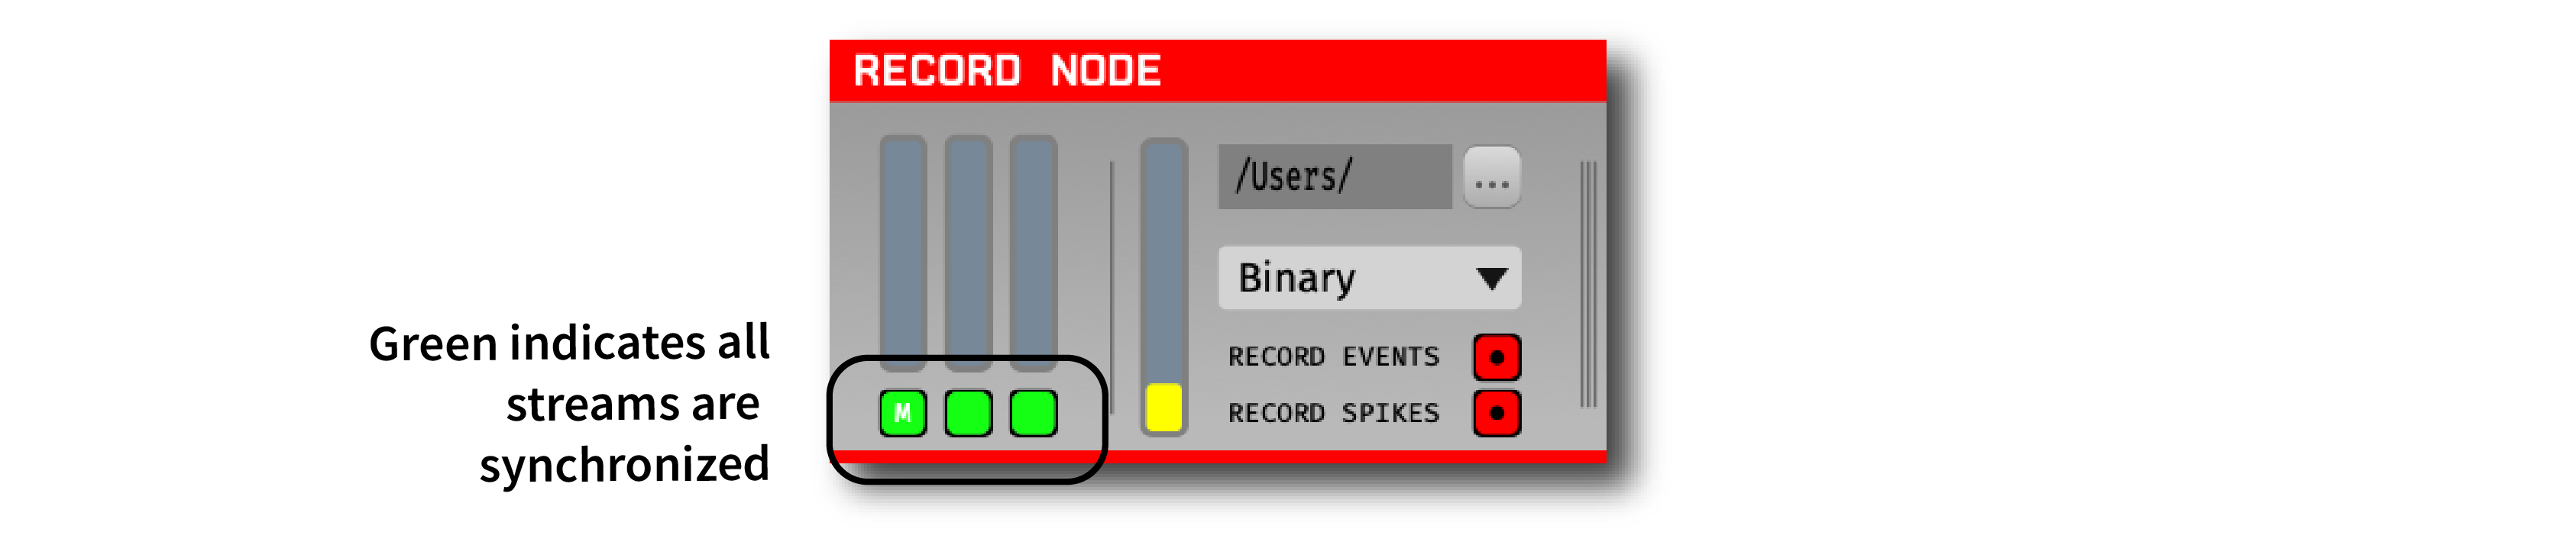 View of the record node when synchronized